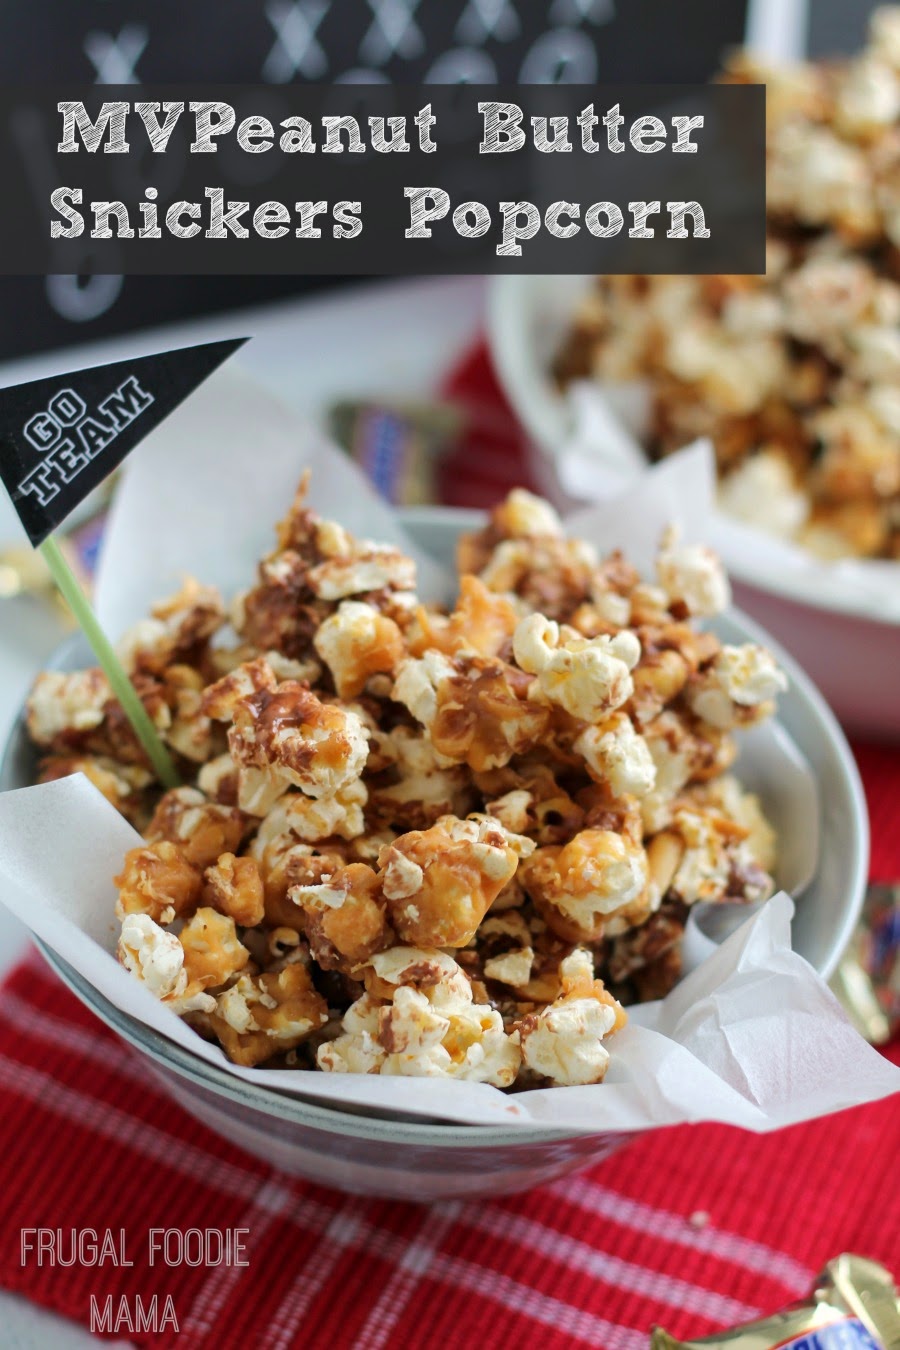 This MVPeanut Butter Snickers Popcorn with it's crunchy popcorn, gooey peanut butter, and bits of Snickers is the perfect sweet treat for game day.